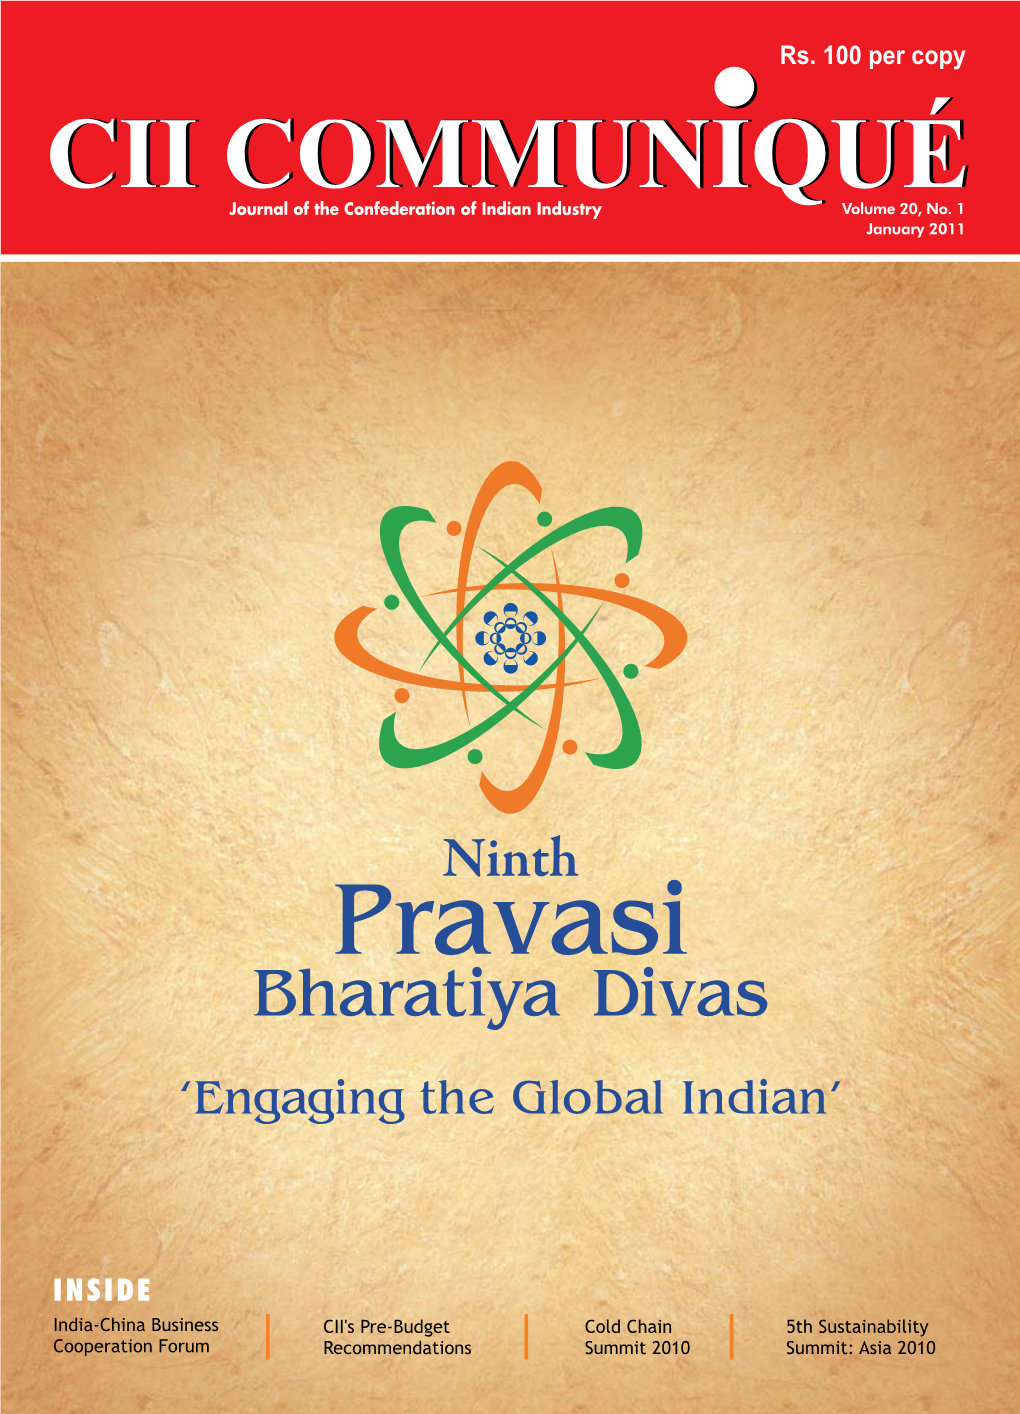 Engaging the Global Indian the 9Th Pravasi Bharatiya Divas Was a Multi-Faceted Event to Strengthen the Resilient Bond Between India and Its Diverse Diaspora